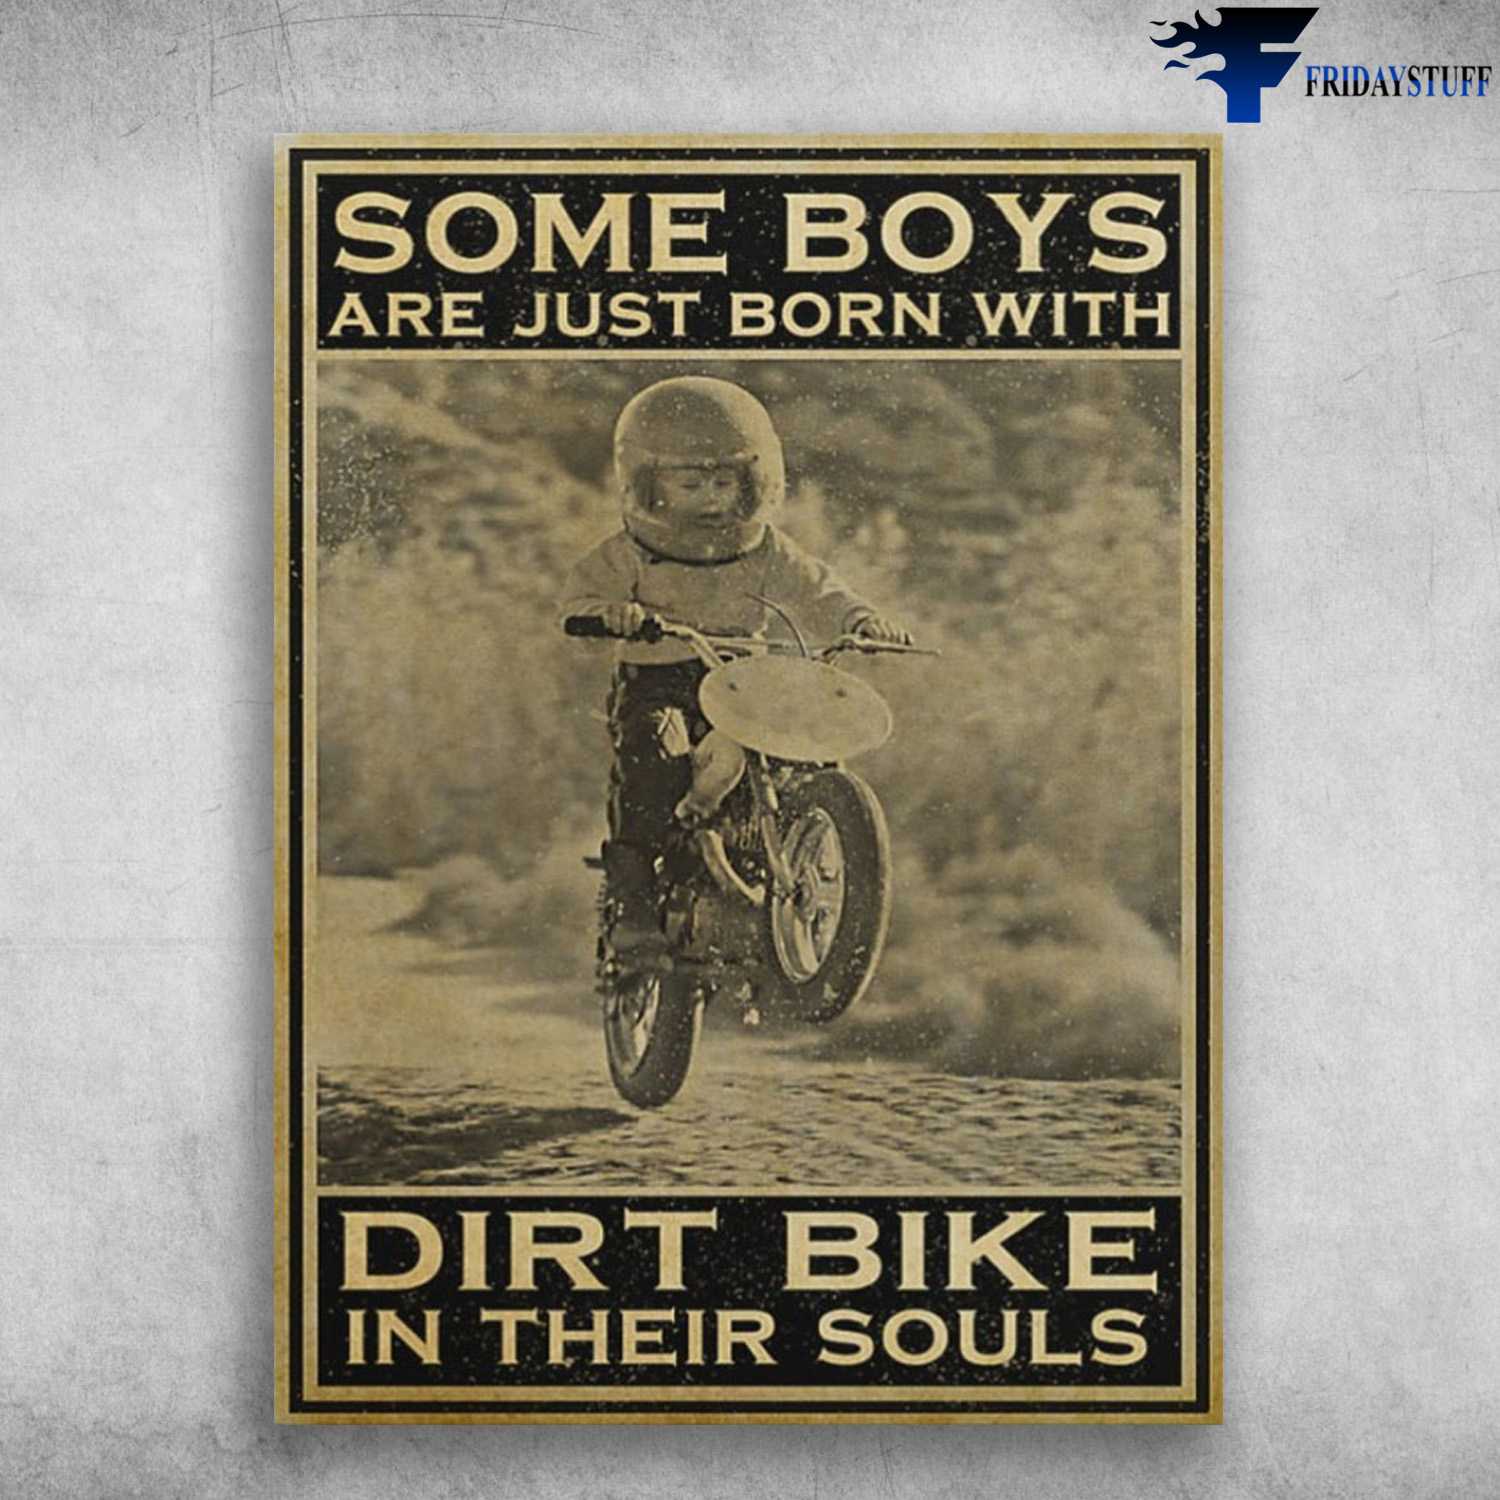 Dirt Bike Lover, Motocross Poster, Some Boys Are Just Born With, Dirt Bike In Their Souls